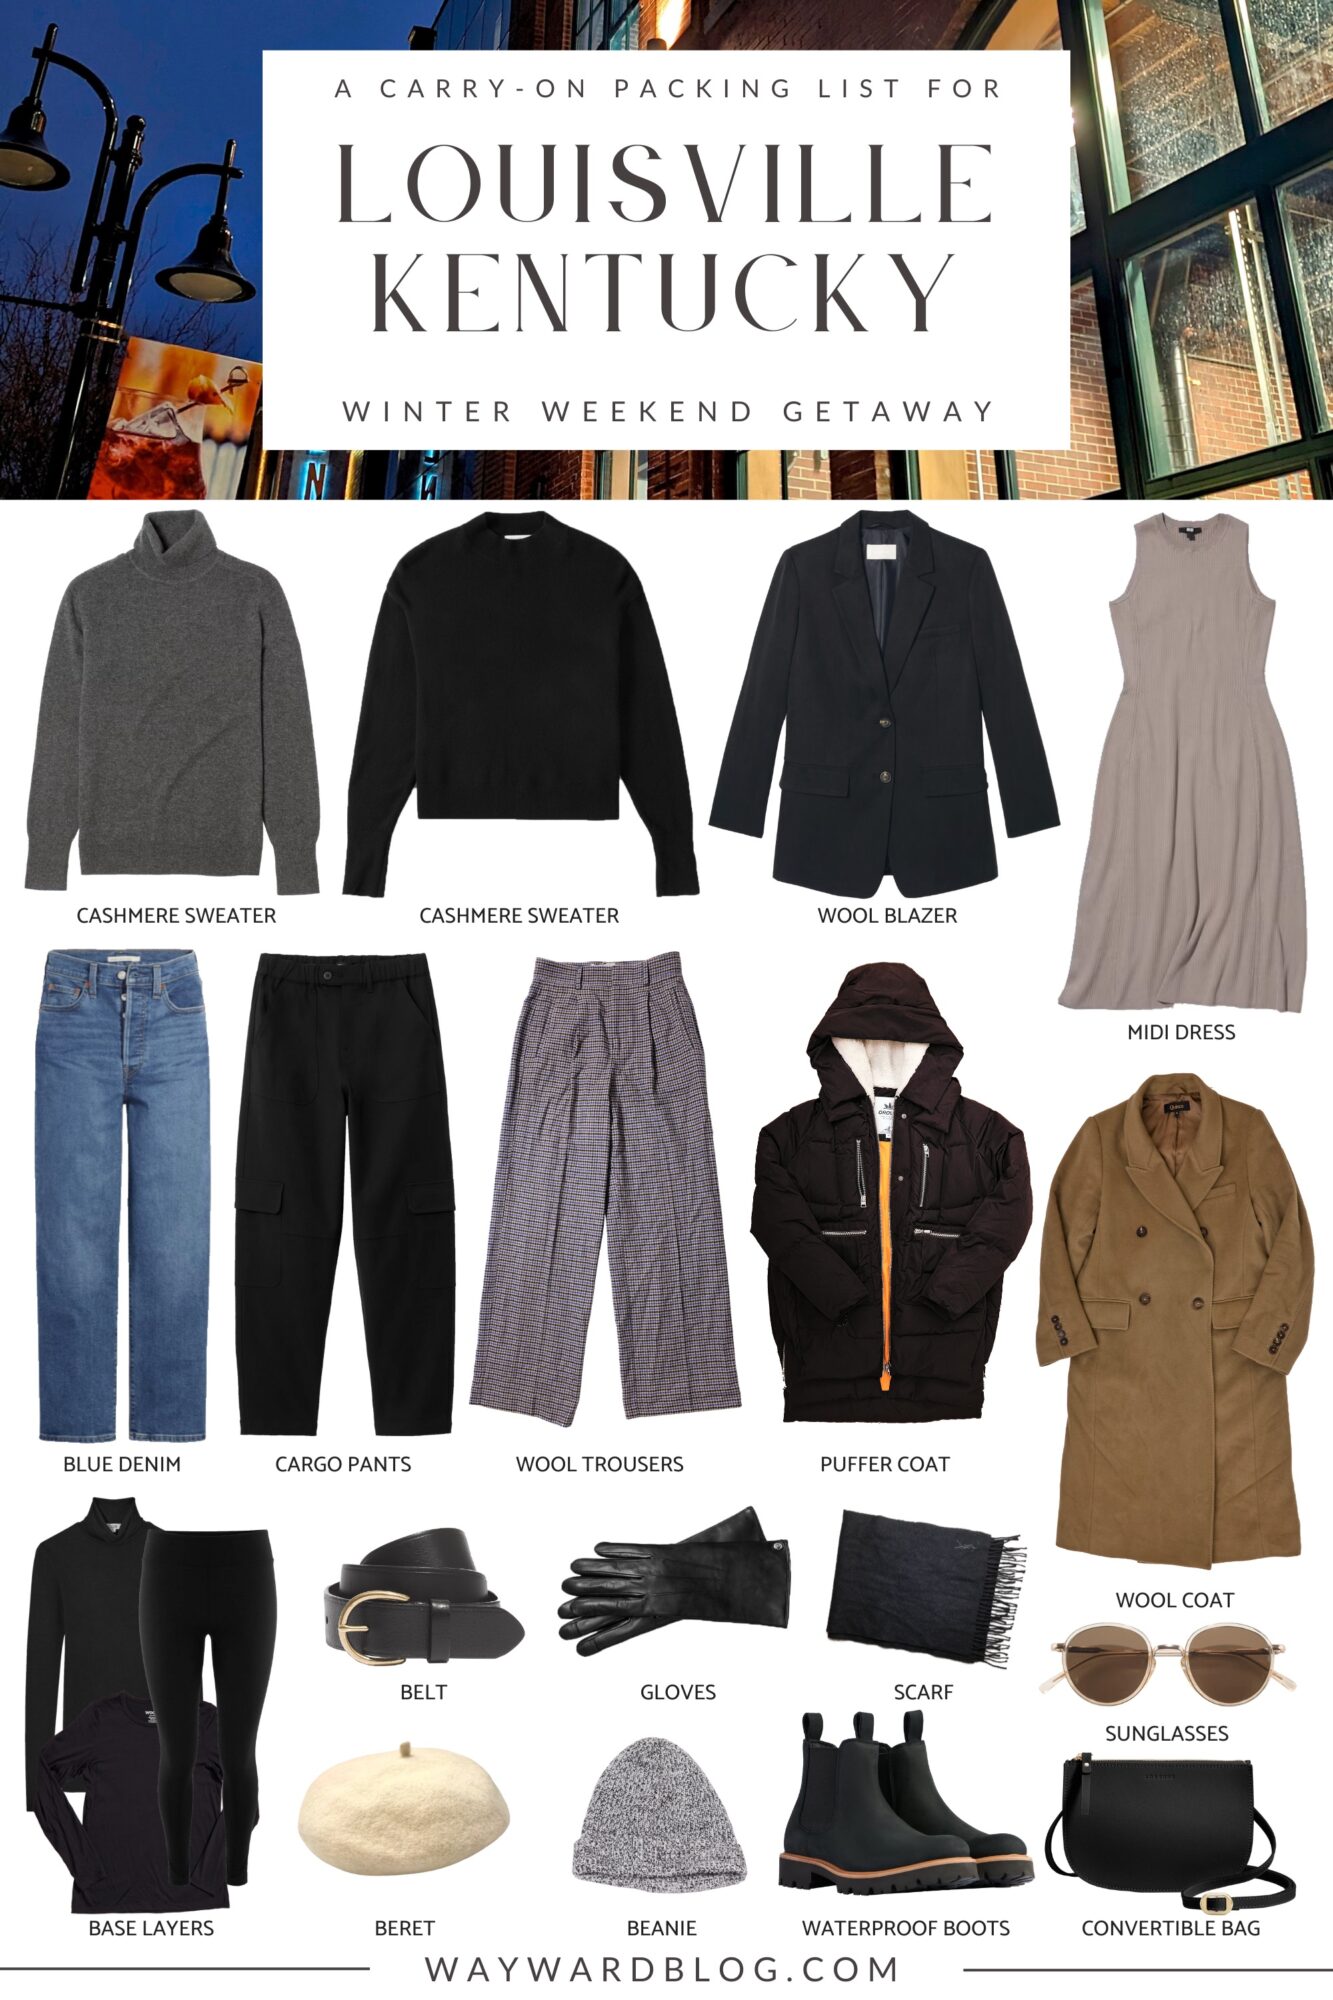 How To Layer Clothes For Cold Weather - the gray details